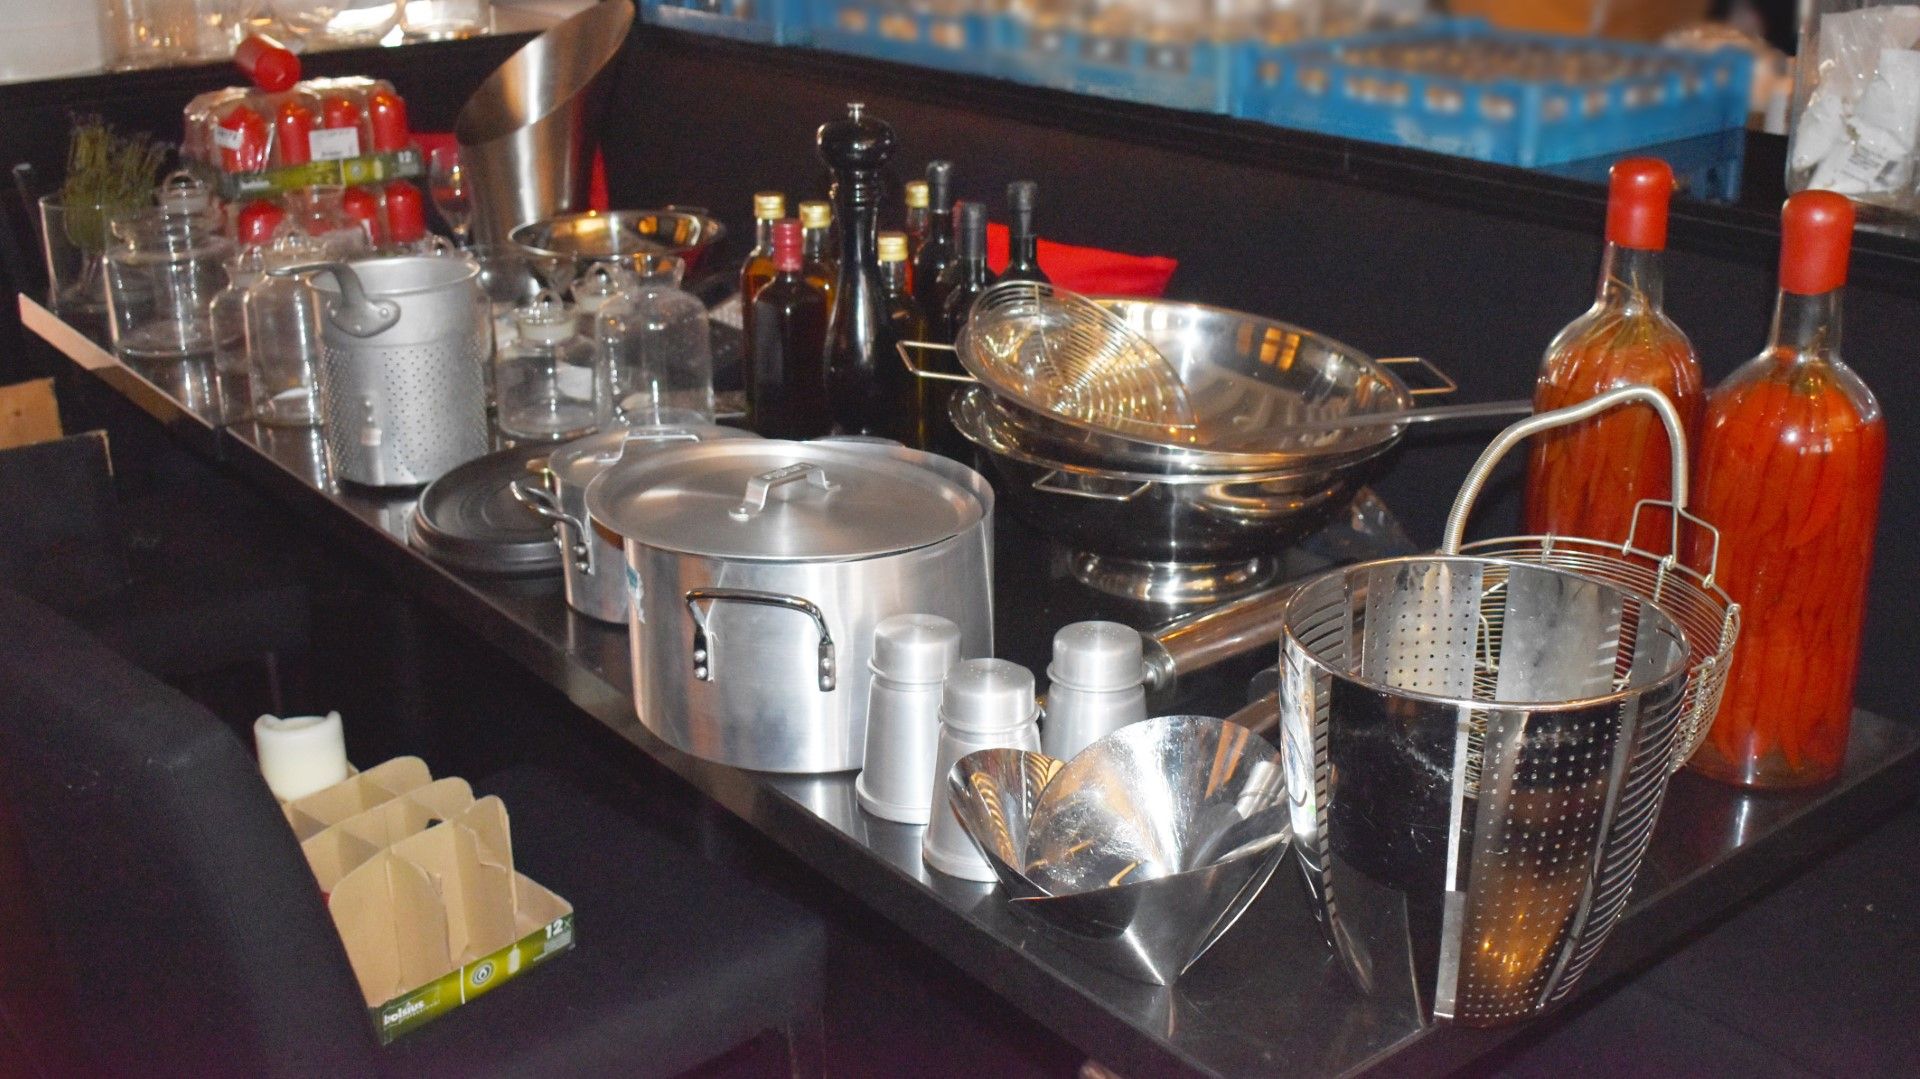 Approx 80 x Assorted Items of Various Kitchenware - Includes Pans, Utensils, Candles, Colanders,